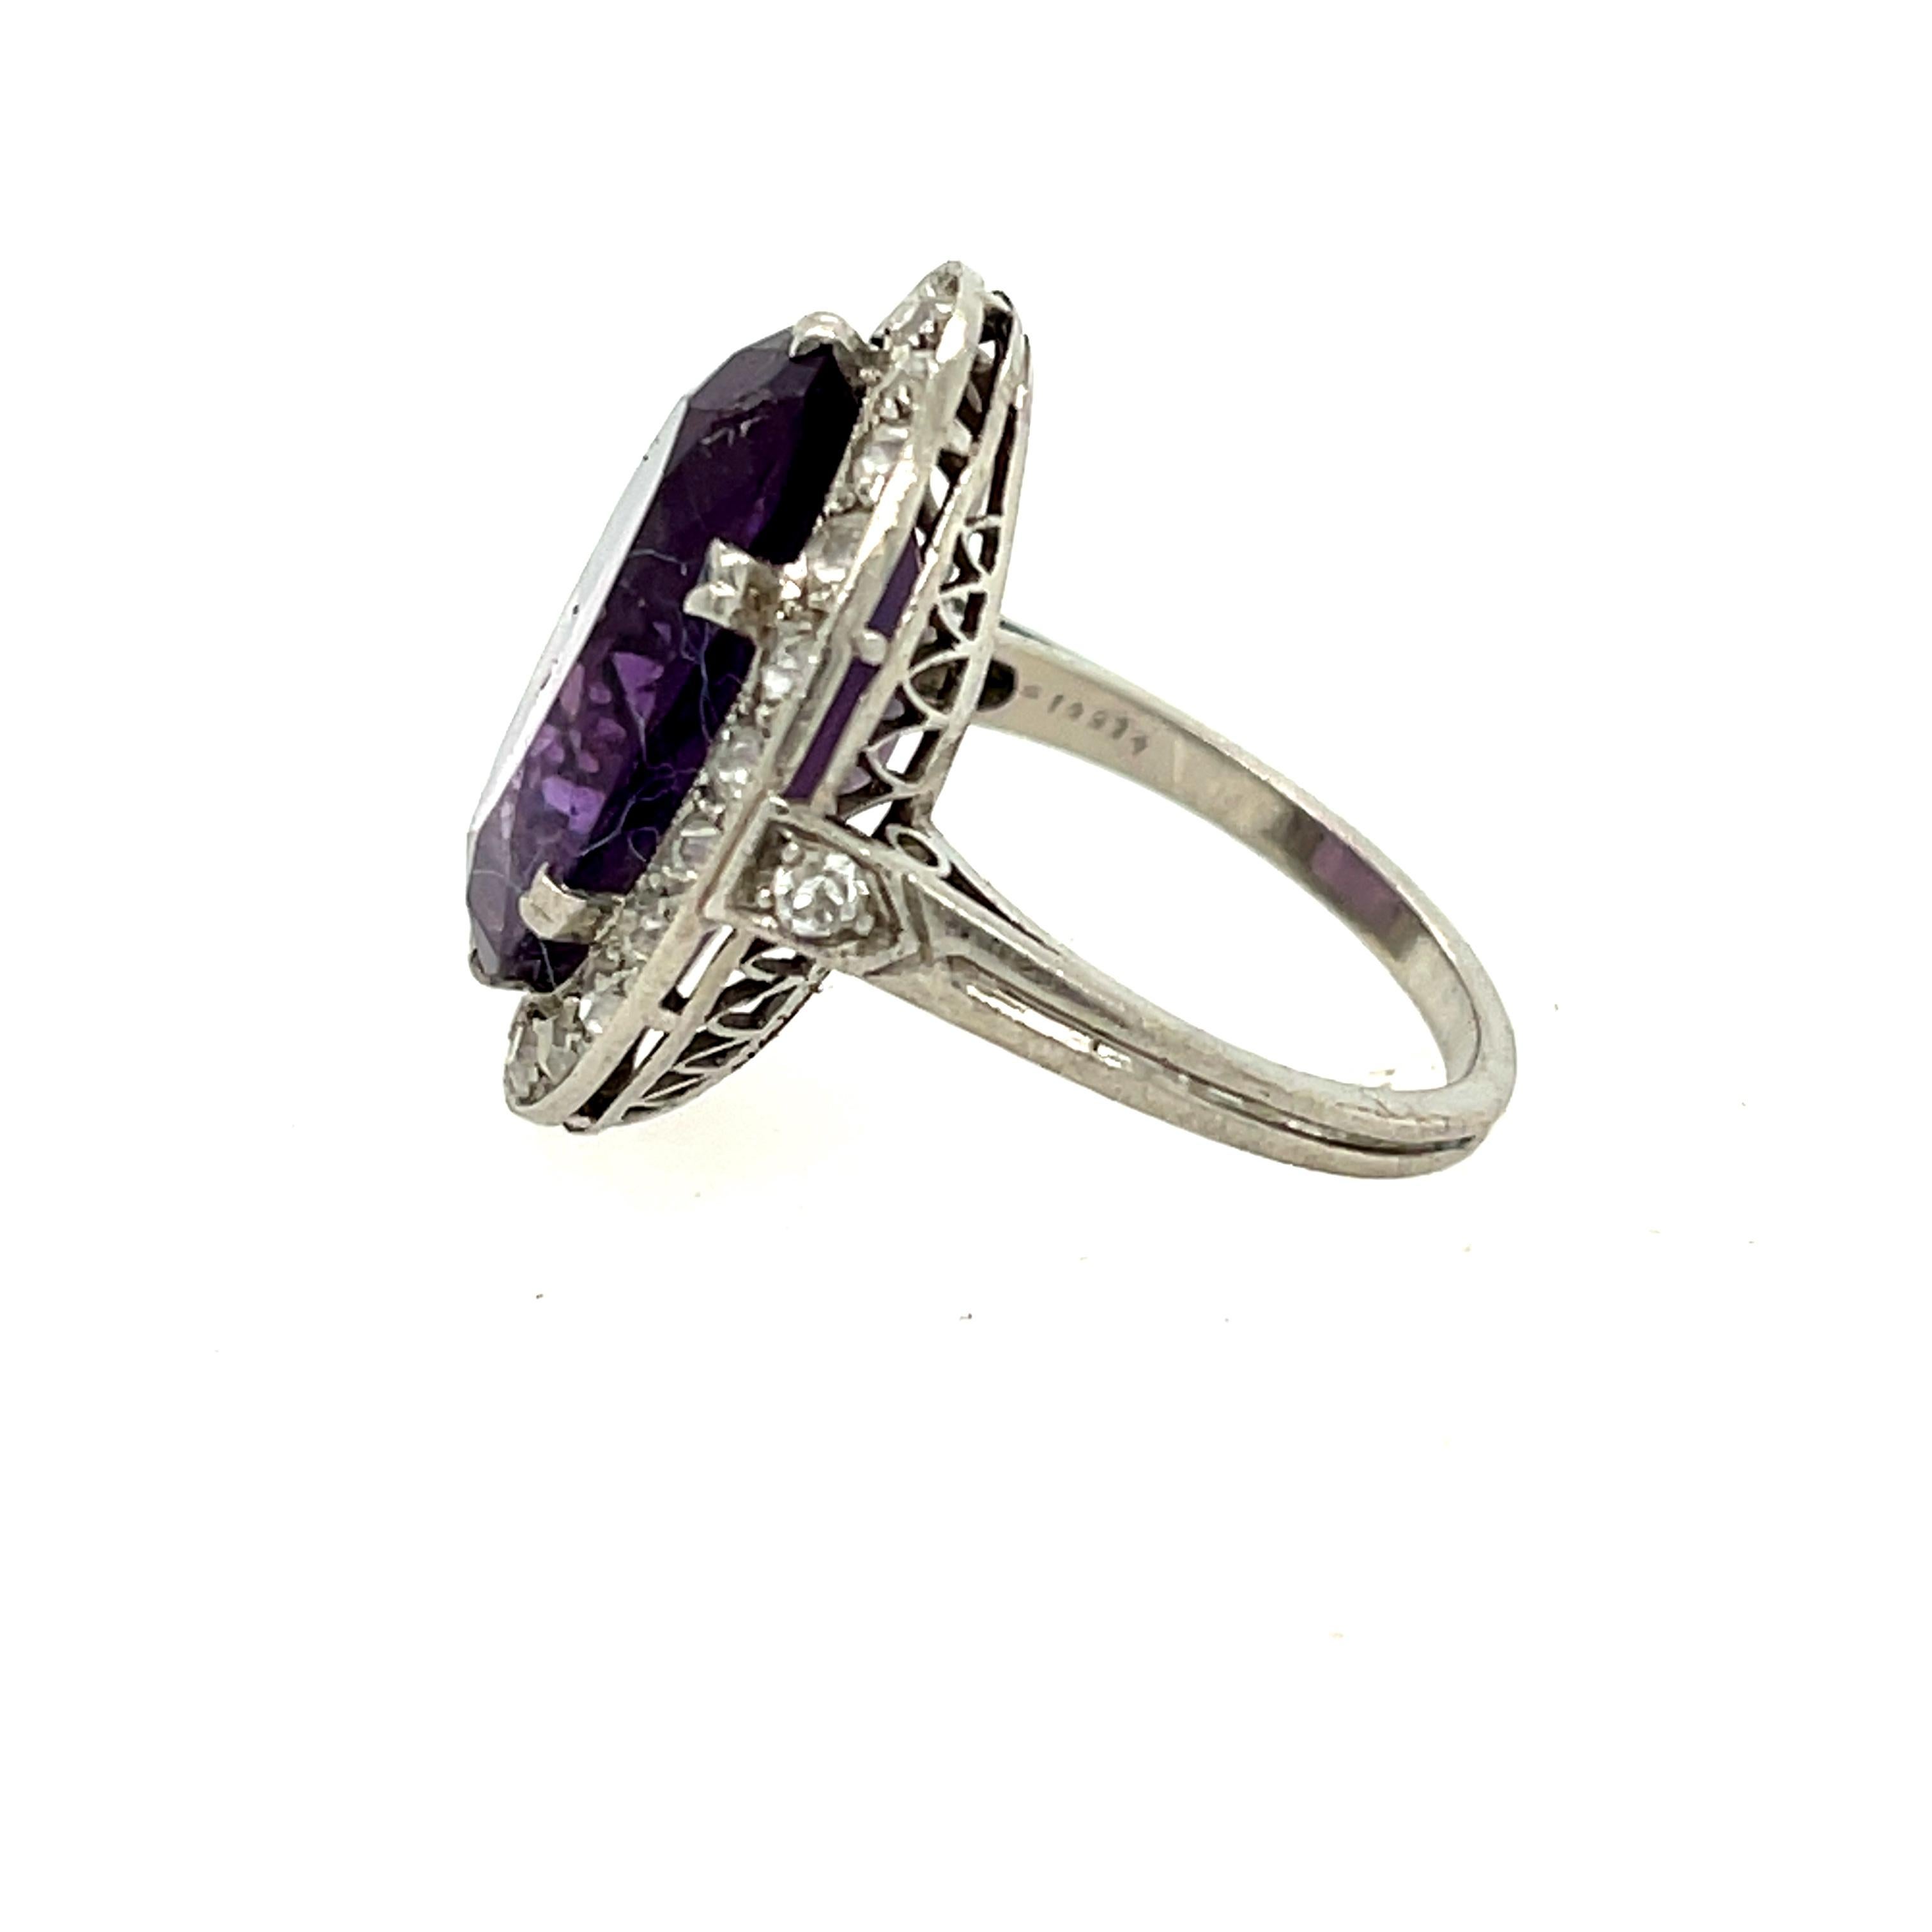 Antique Edwardian platinum diamond oval amethyst ring, circa 1910. This gorgeous ring is beautifully made centering on an oval amethyst with a rich purple hue. The ring has a halo of 26 old European cut diamonds weighing 0.90 carats approximately.